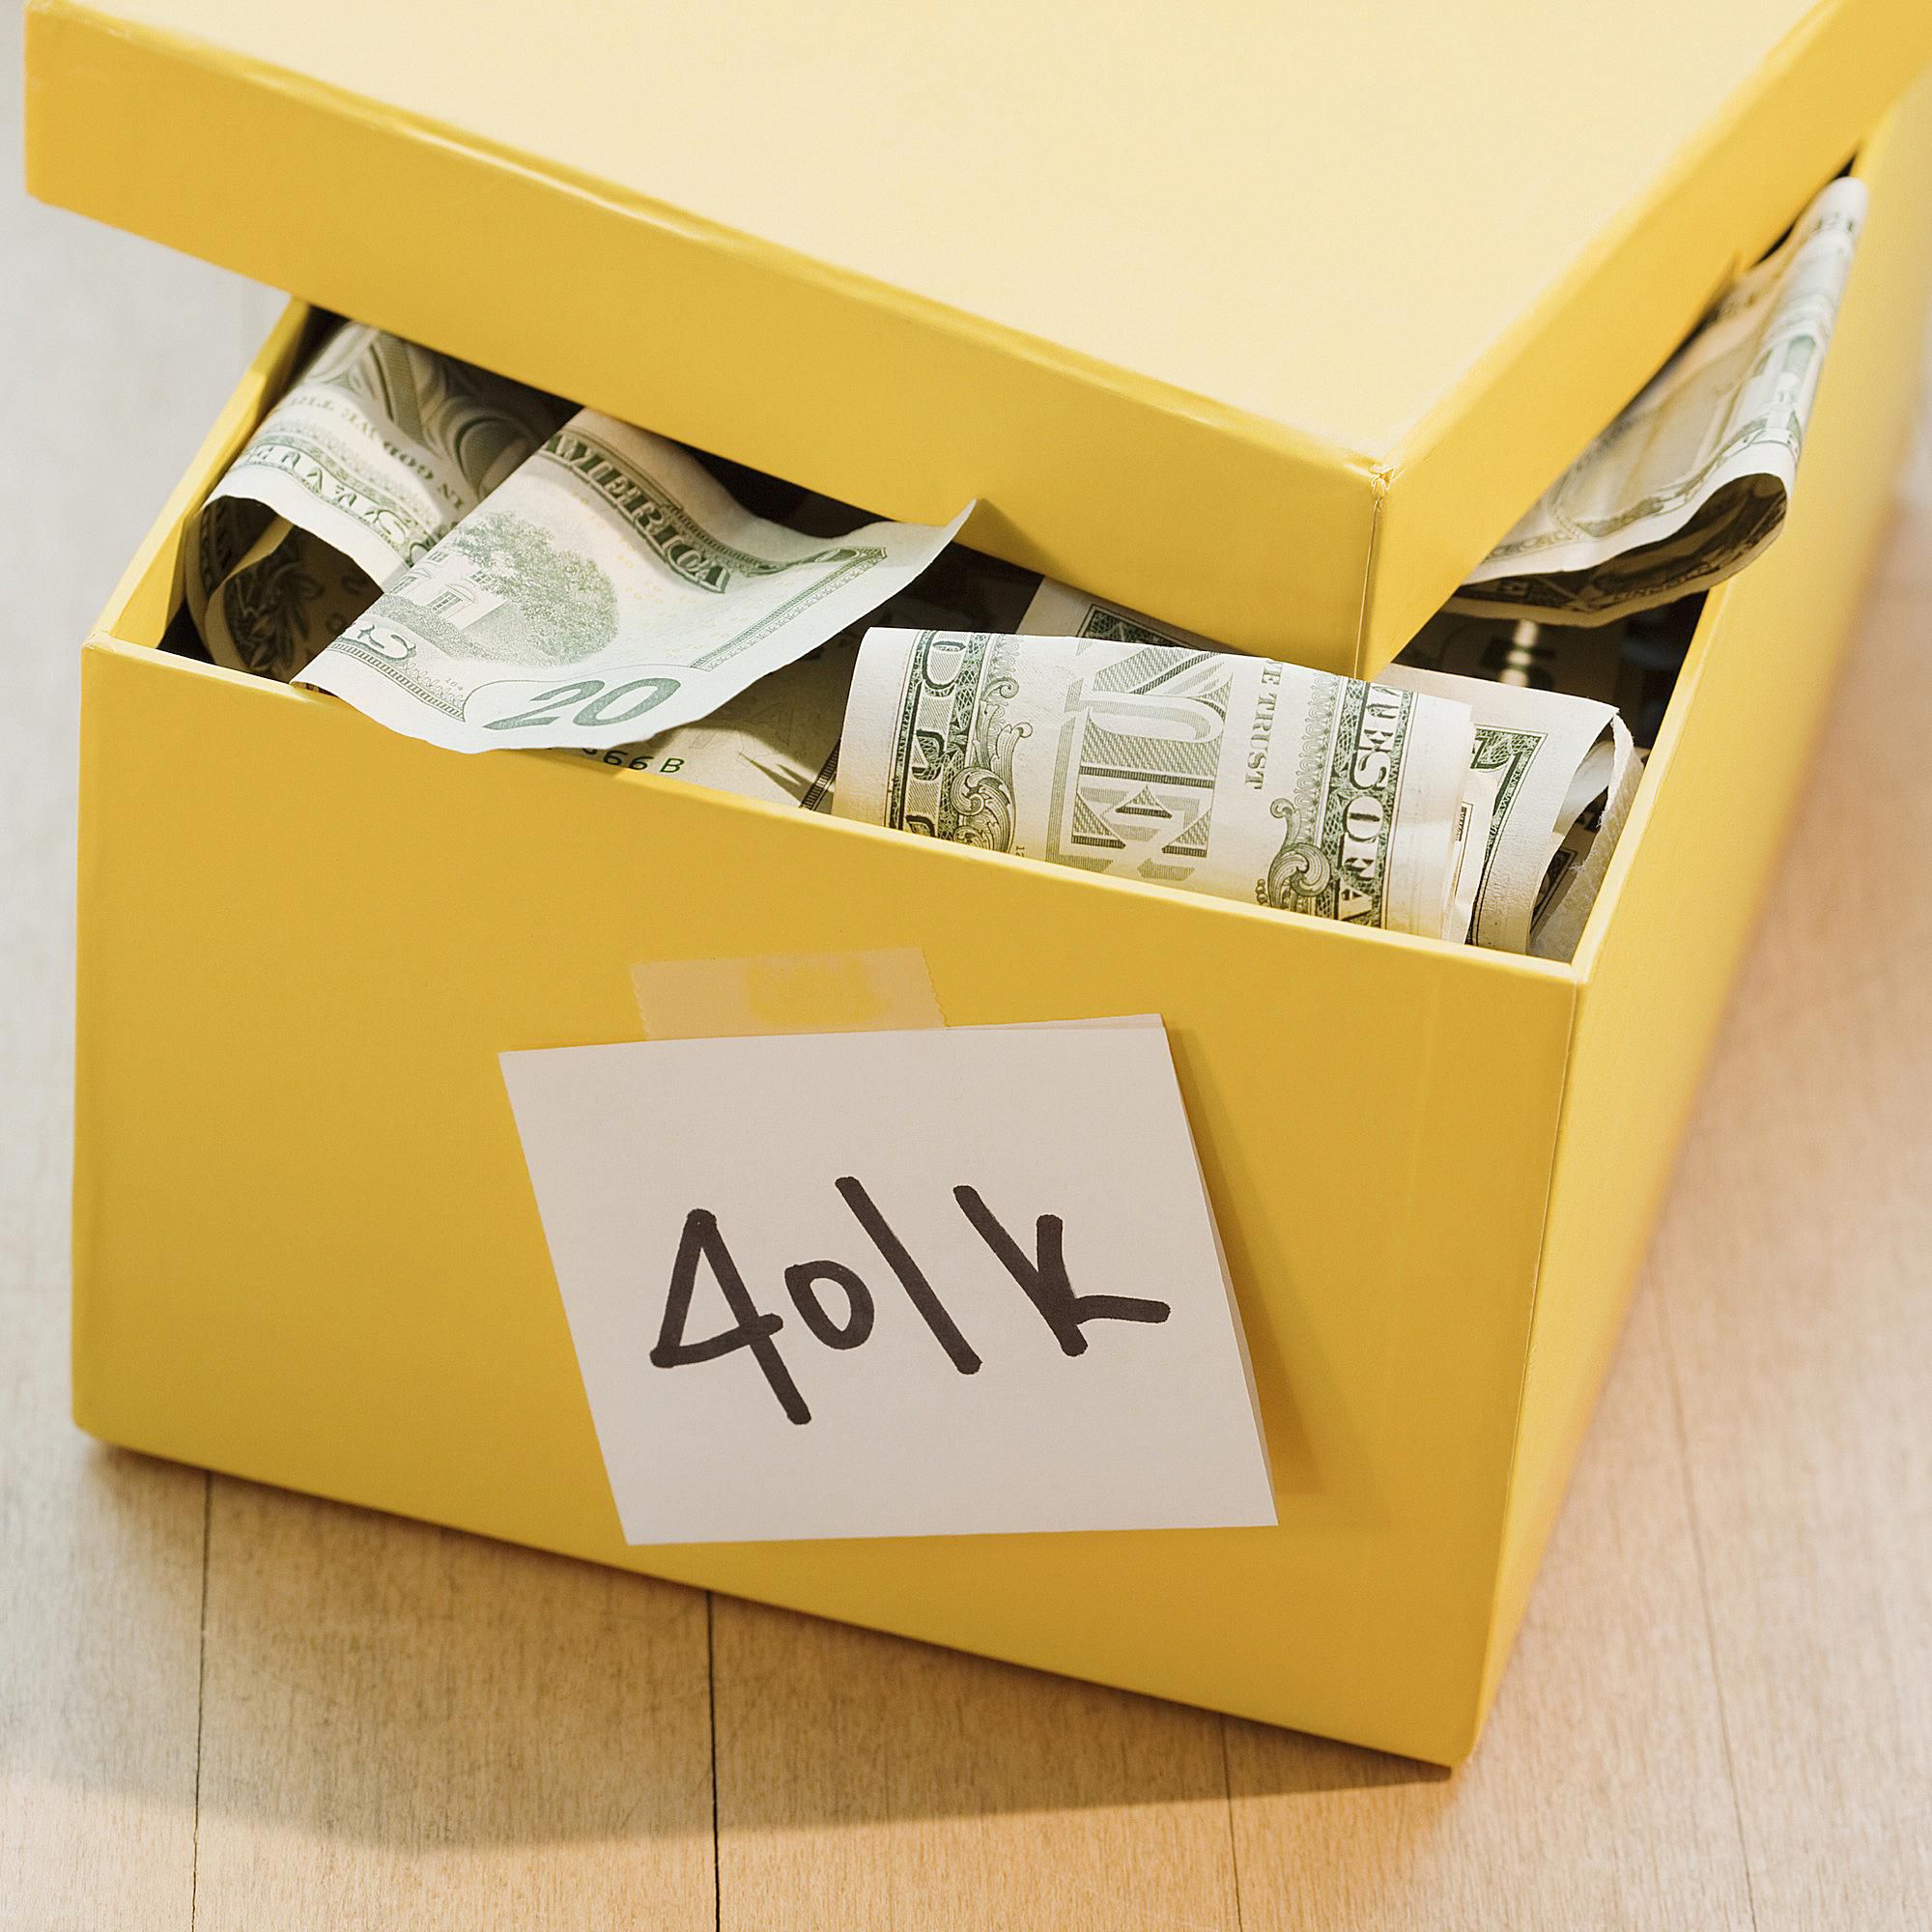 Things to Know Before Borrowing From Your 401(k)